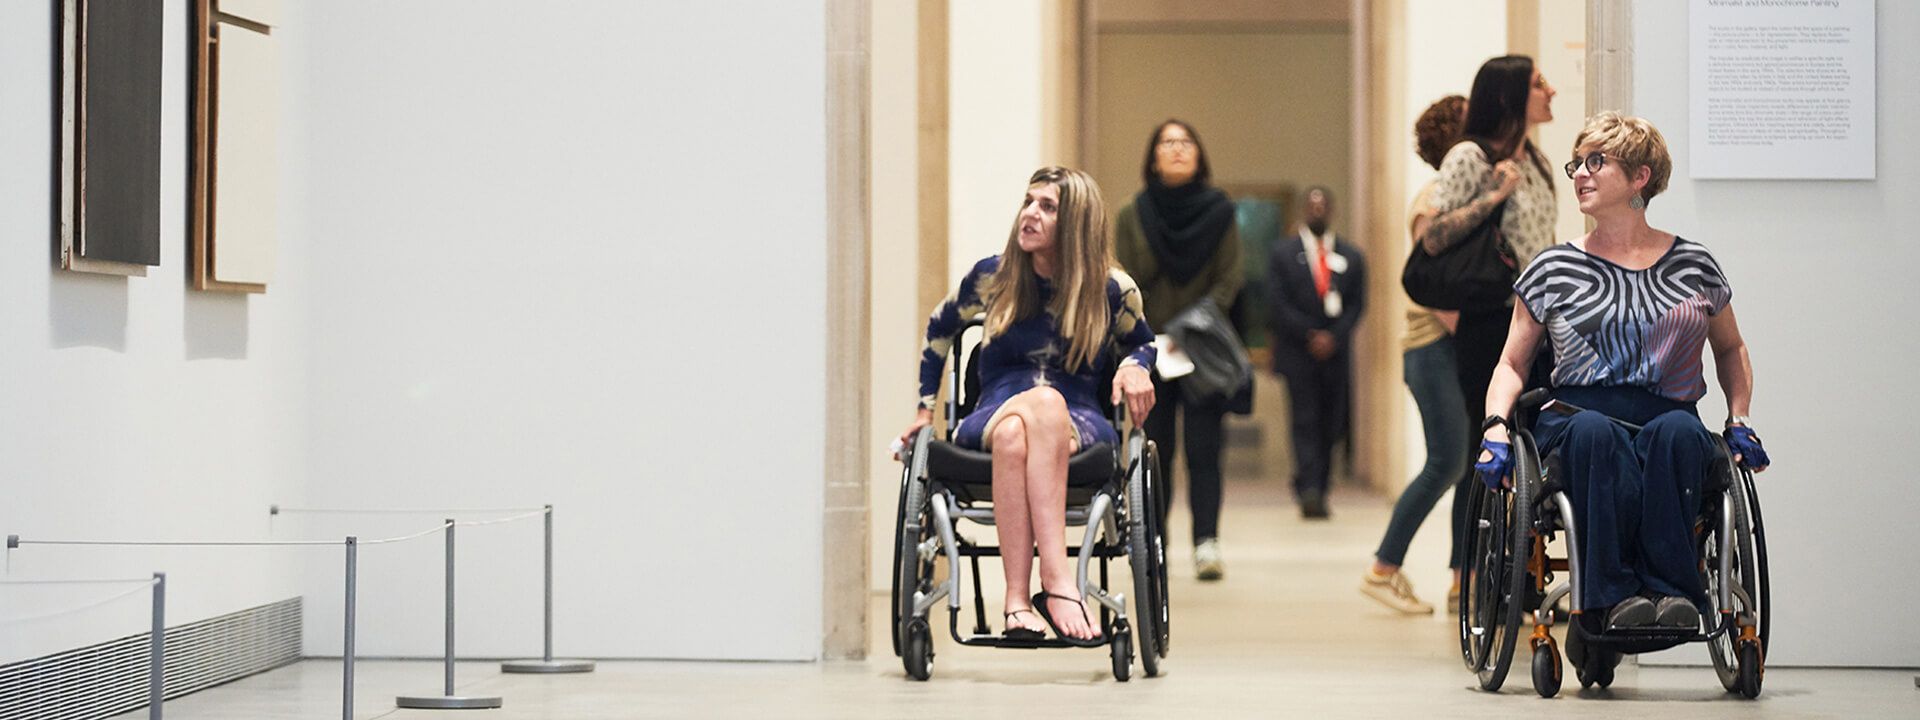 Two visitors in wheelchairs explore the galleries